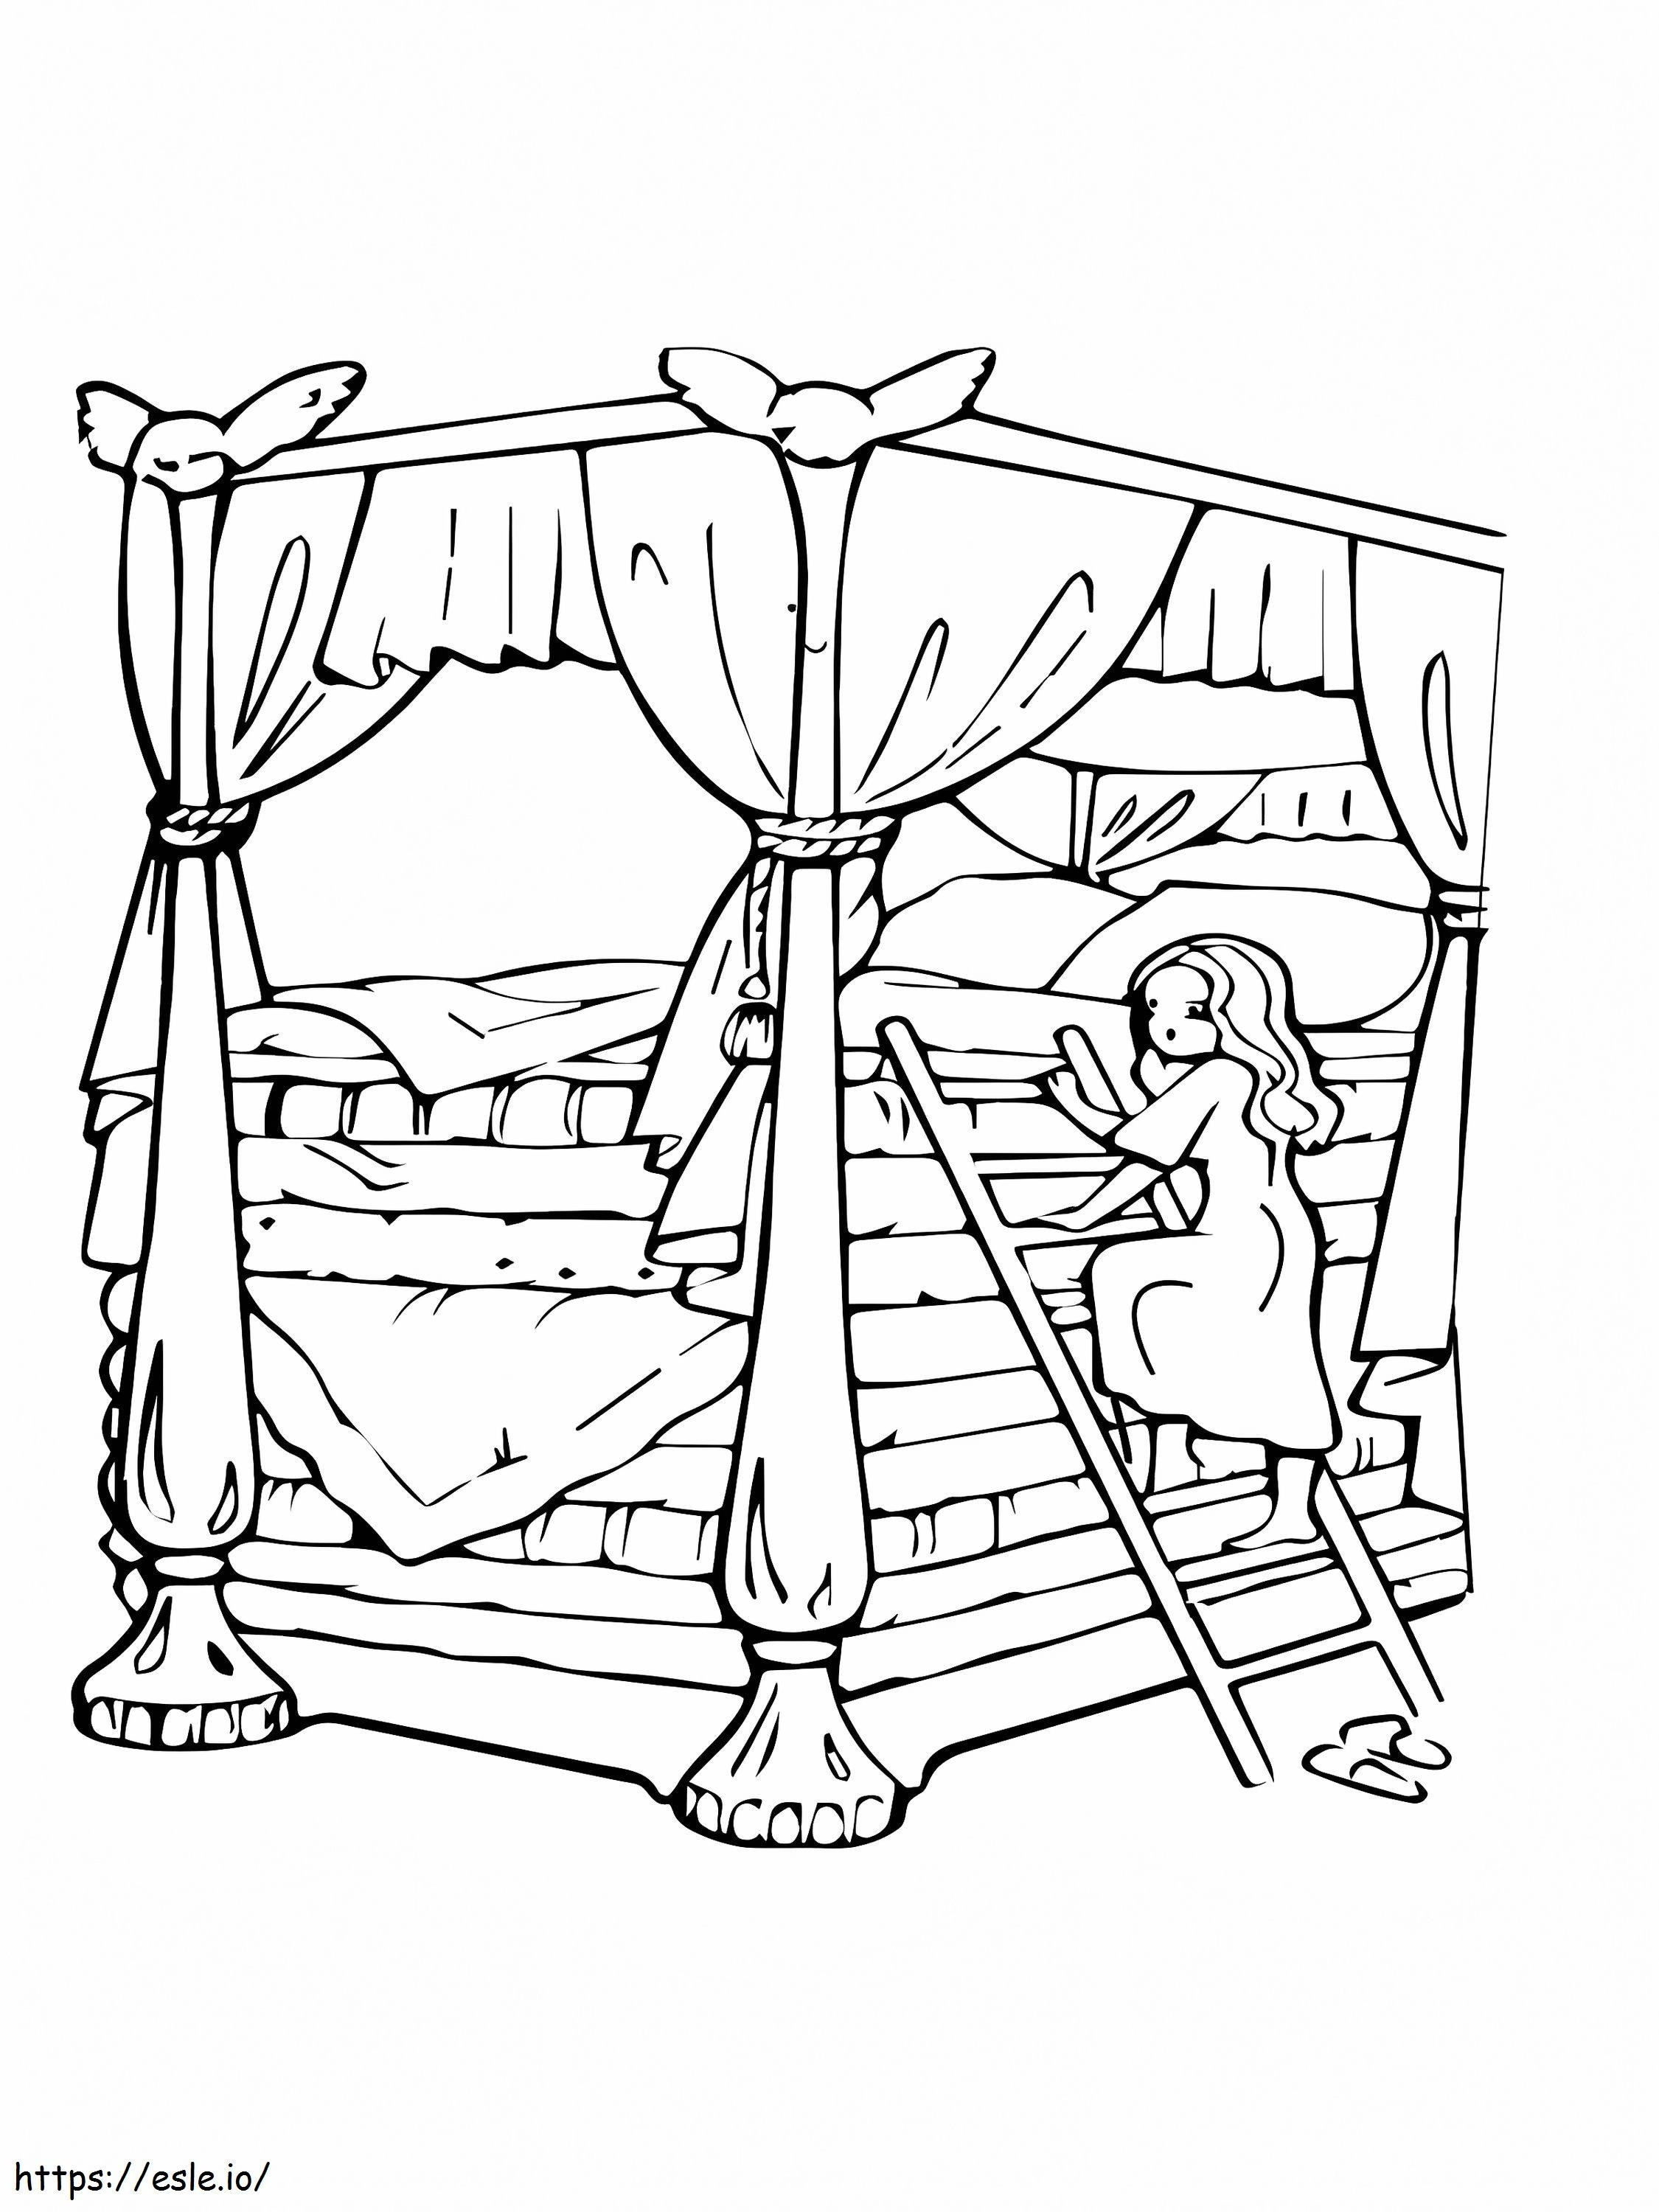 Adorable Princess And The Pea coloring page